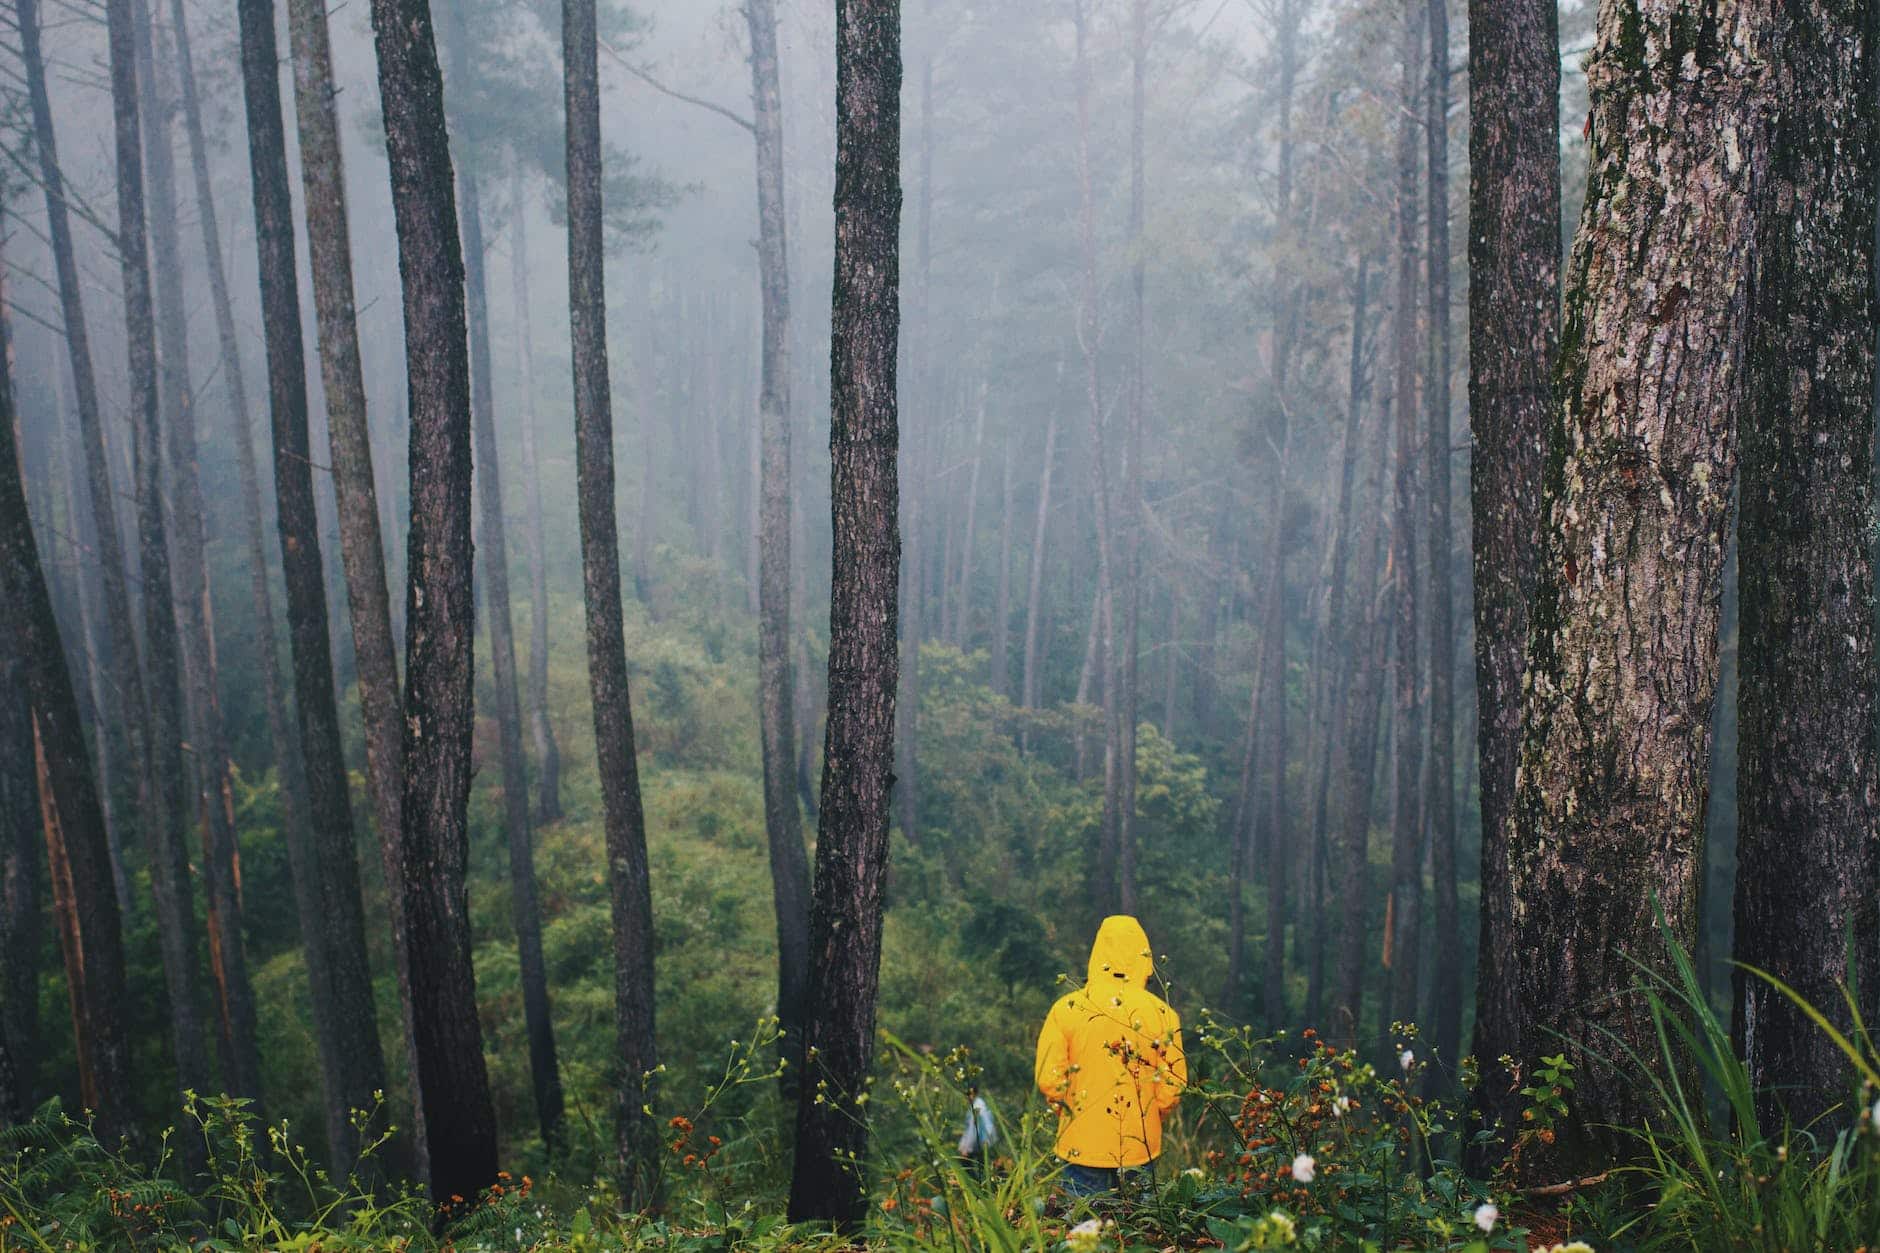 photo of person in yellow jacket standing in forest